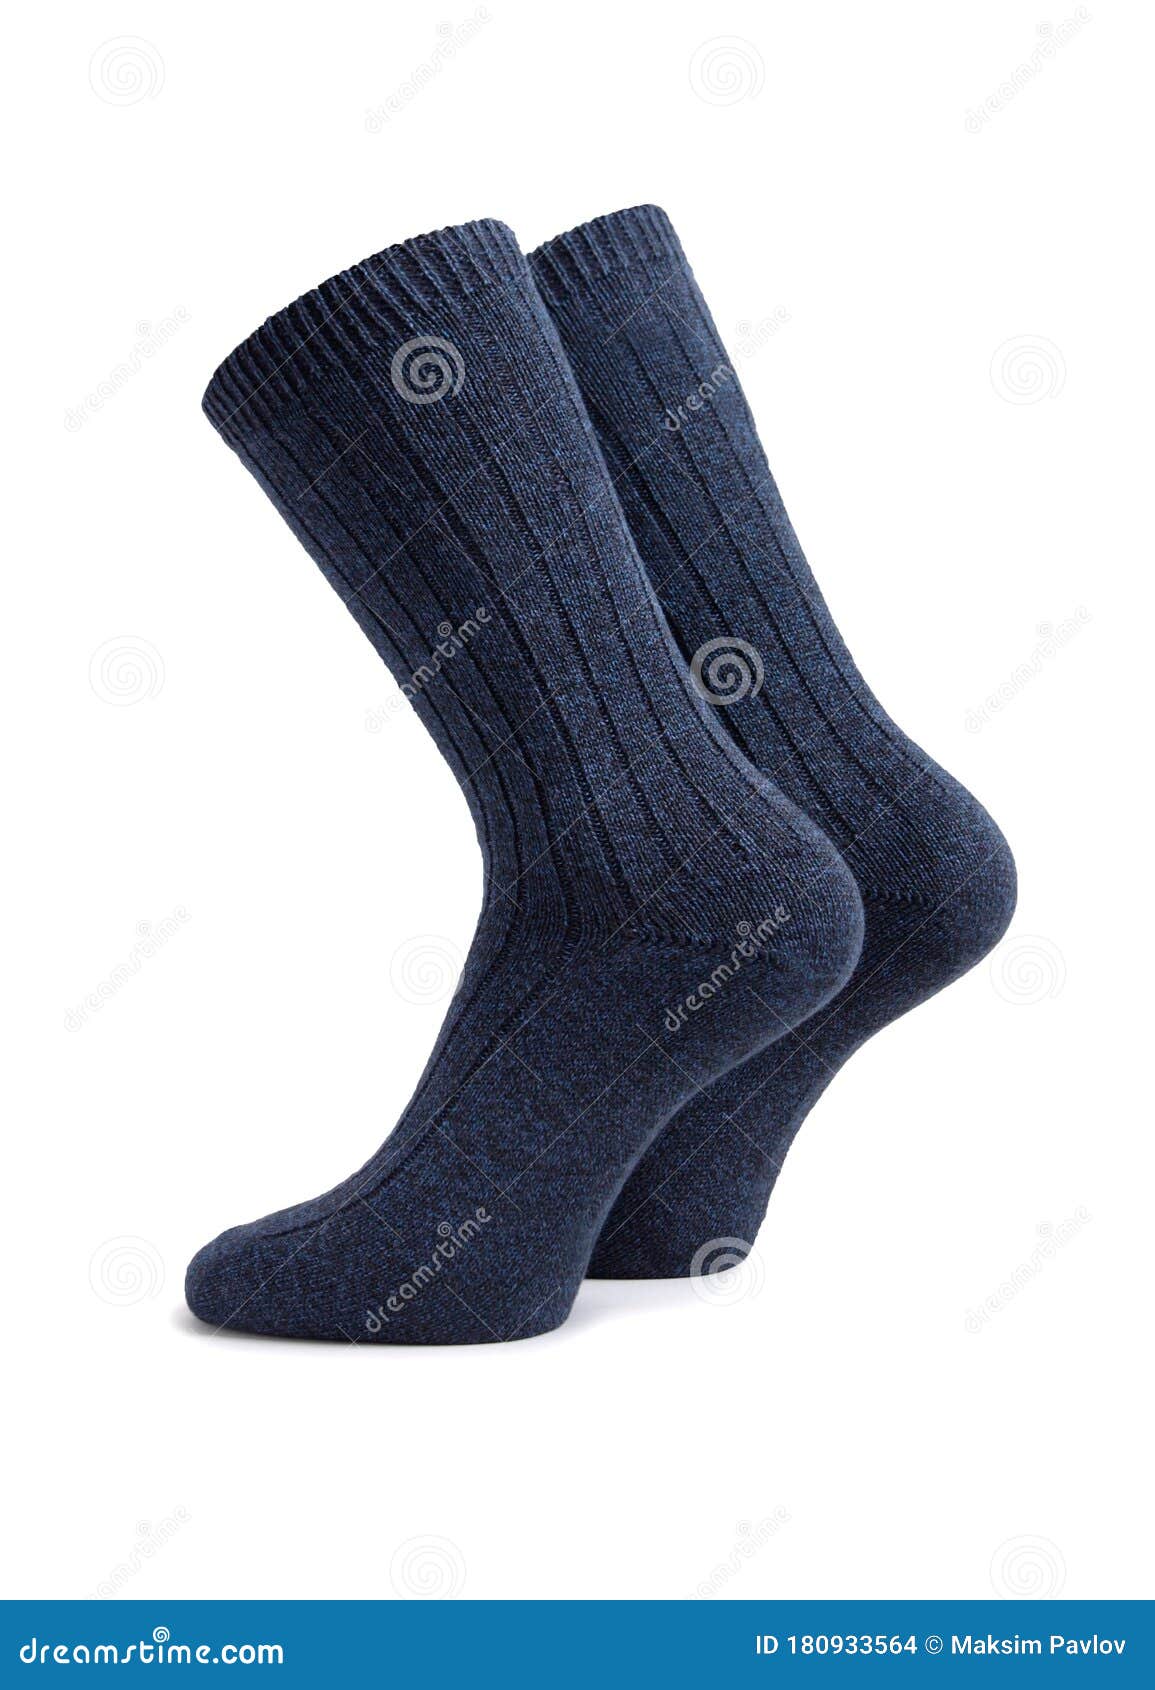 Blue Color Socks Isolated on White Background. One Pair of Socks. Set ...